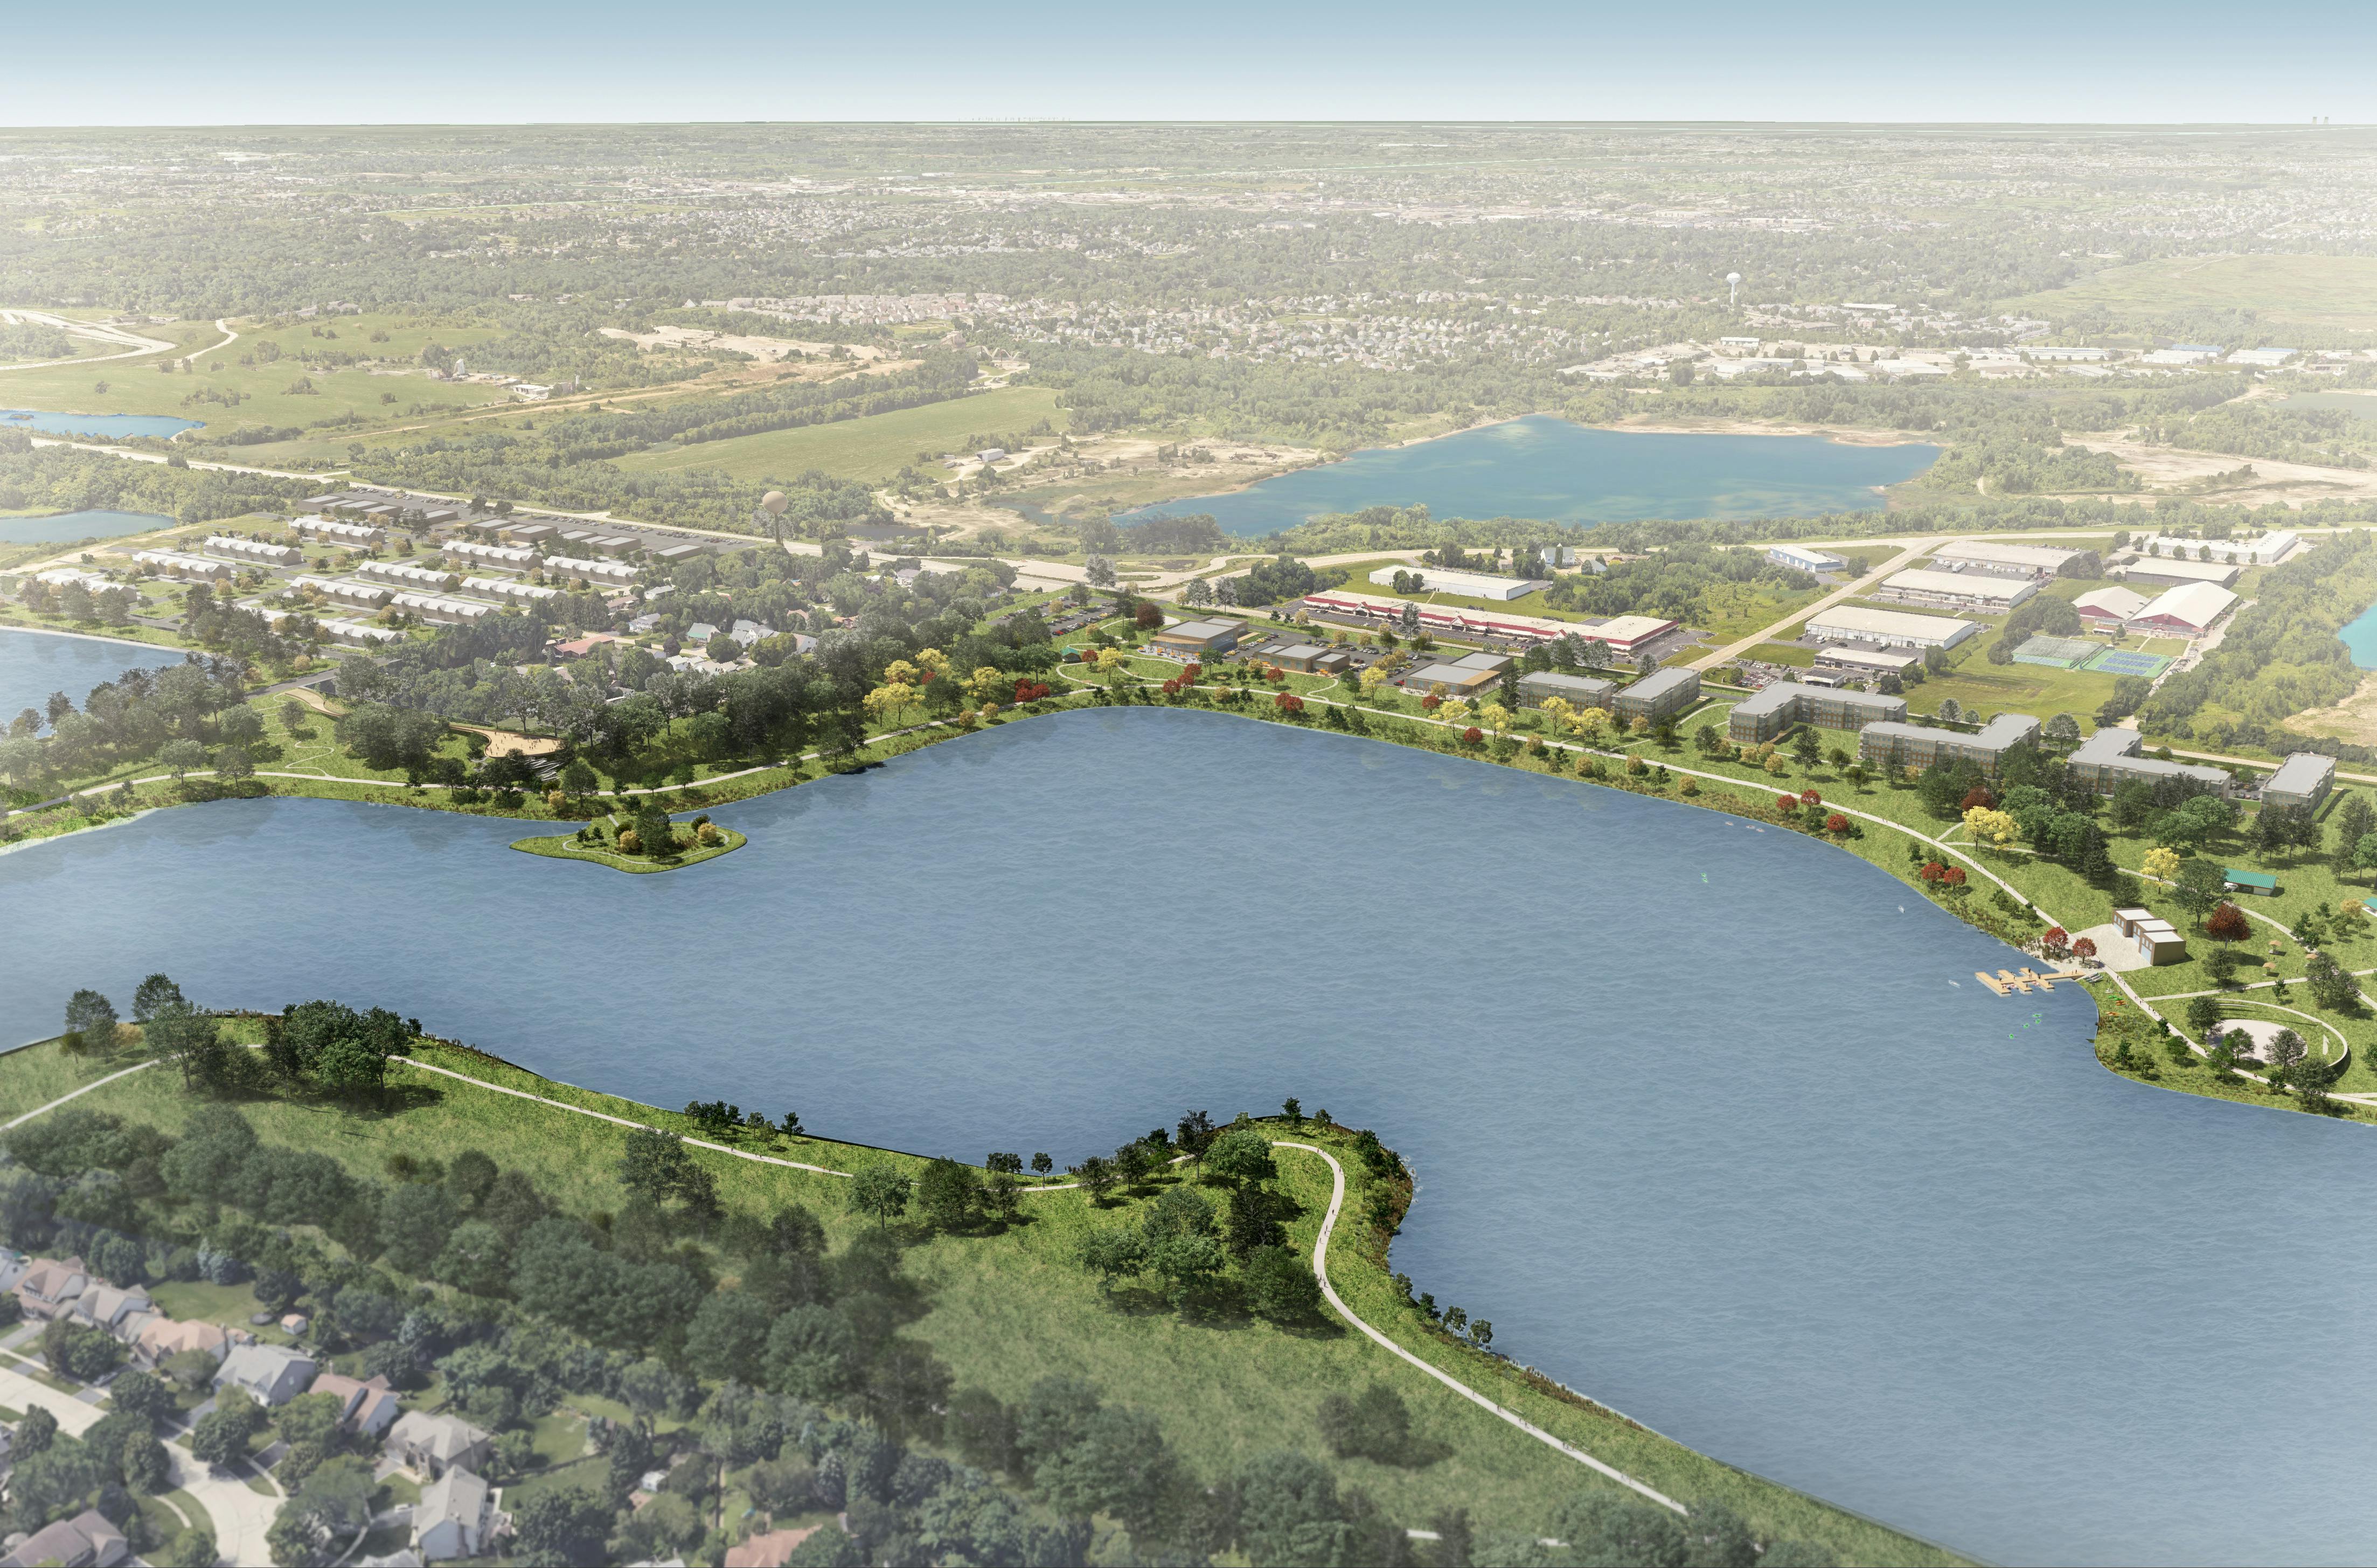 Conceptual illustration of Cary Lake at Rotary Park and surrounding area